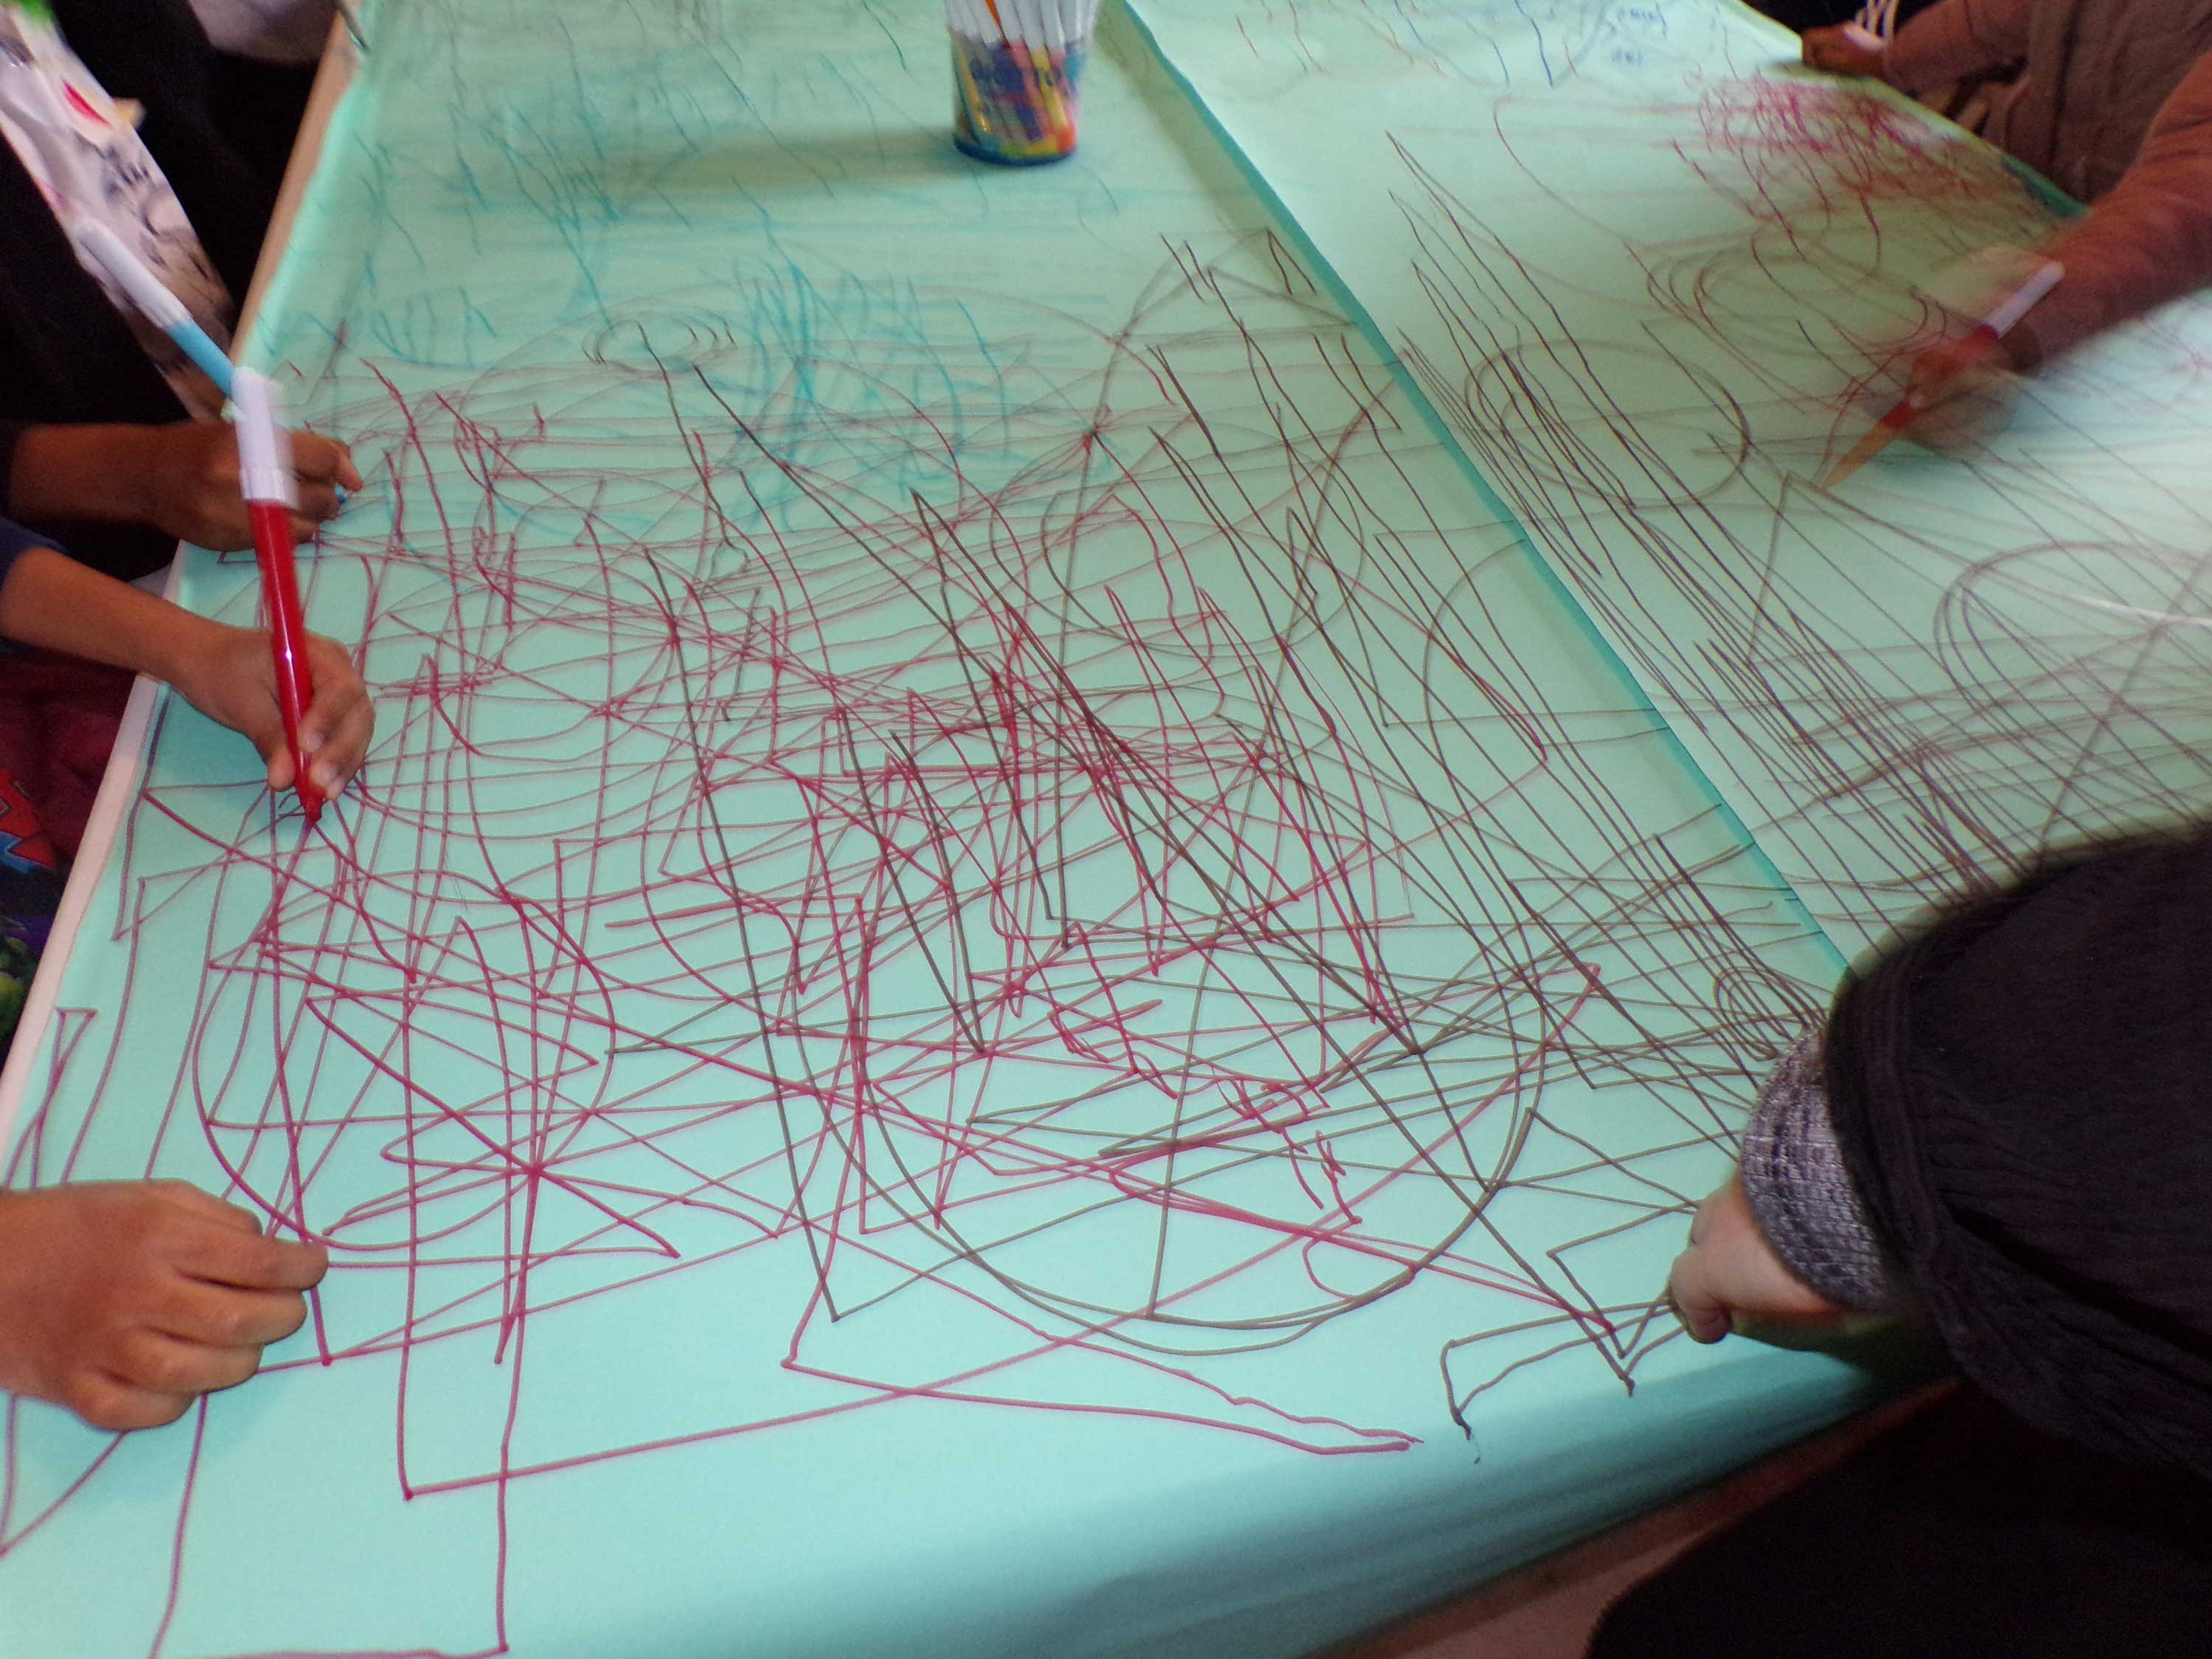 A group of participants creating patterns and mark making using red pens on a green paper